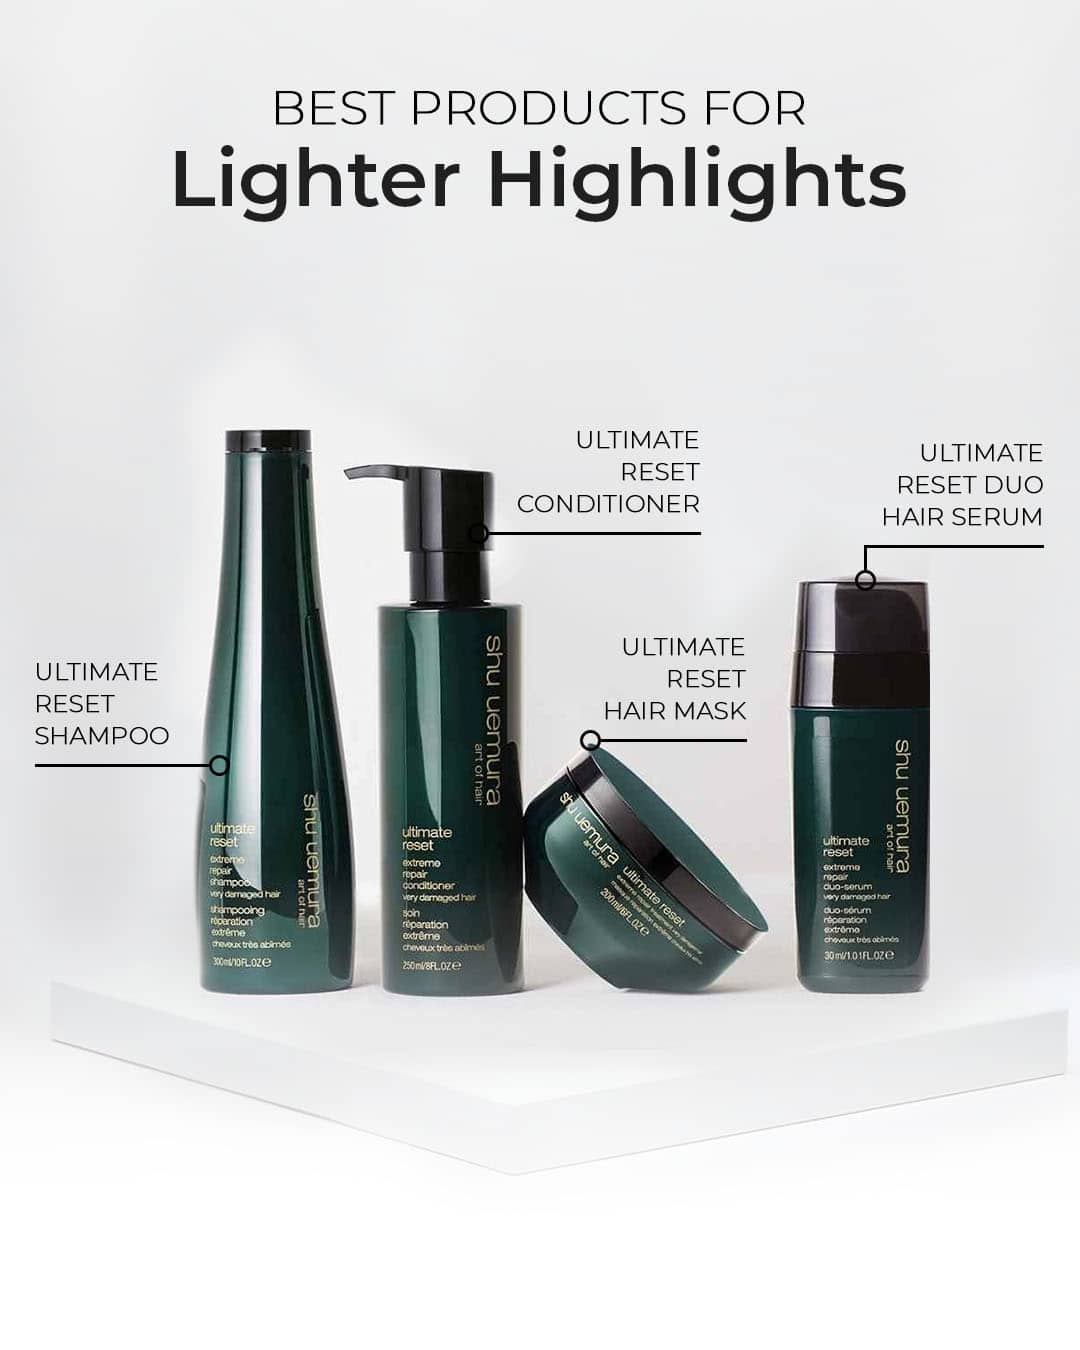 Shu Uemura's Utimate Reset products for lighter highlights hair